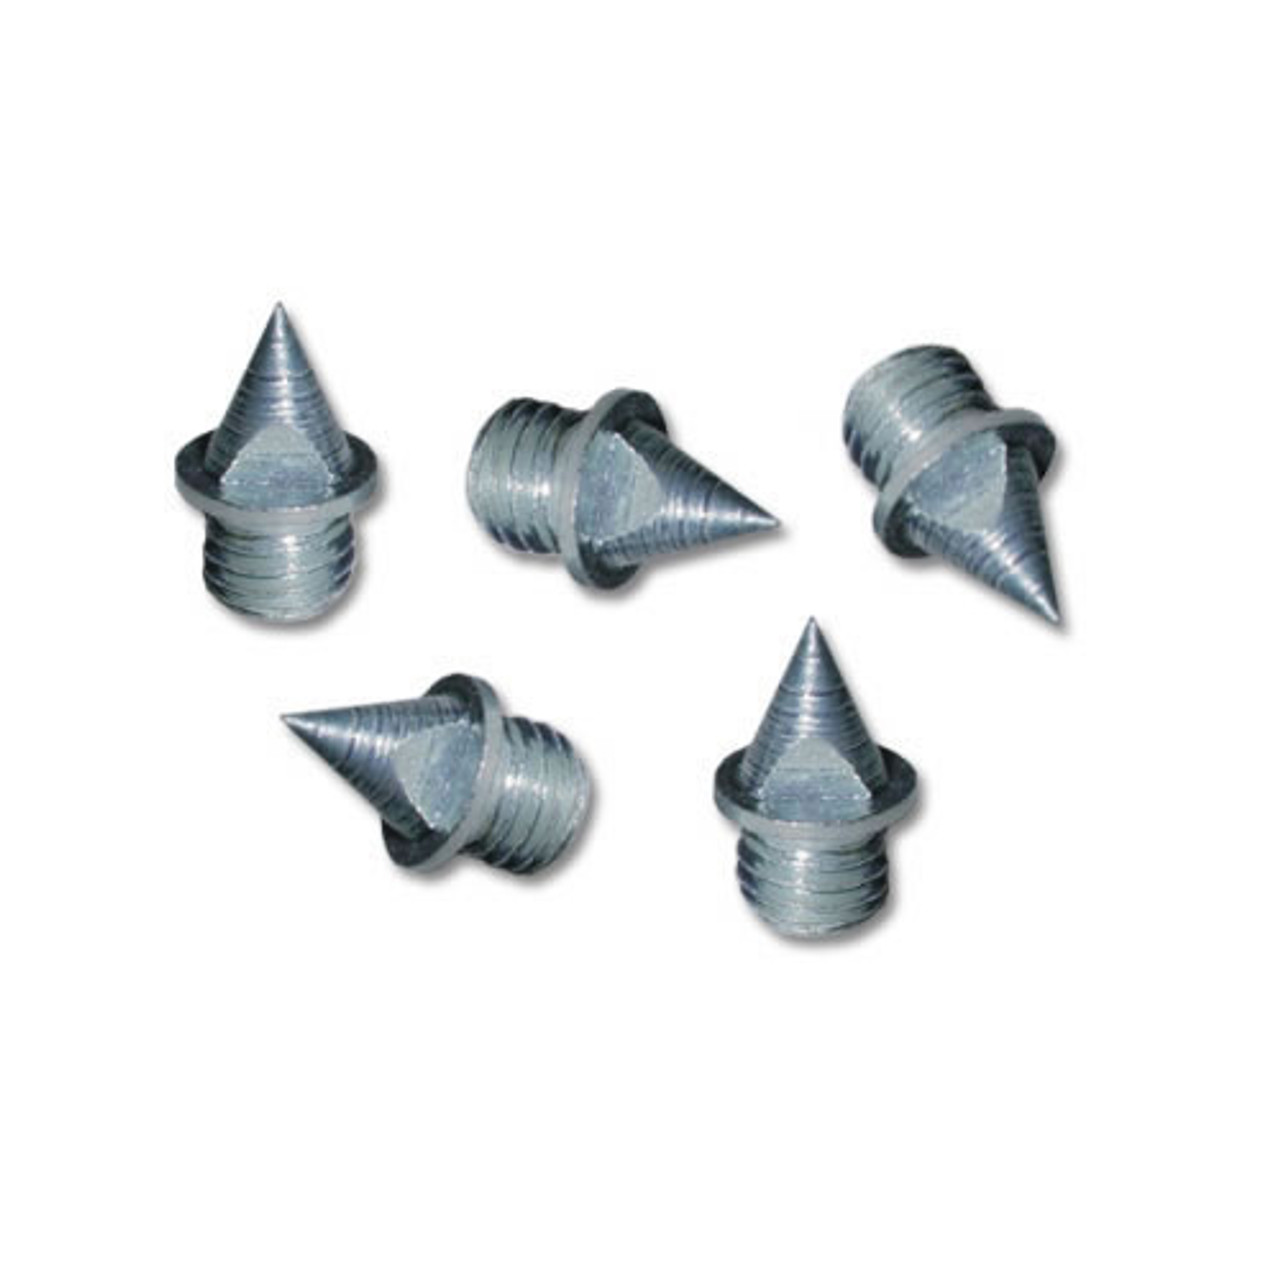 1/4" Pyramid Spikes-Bag of 100